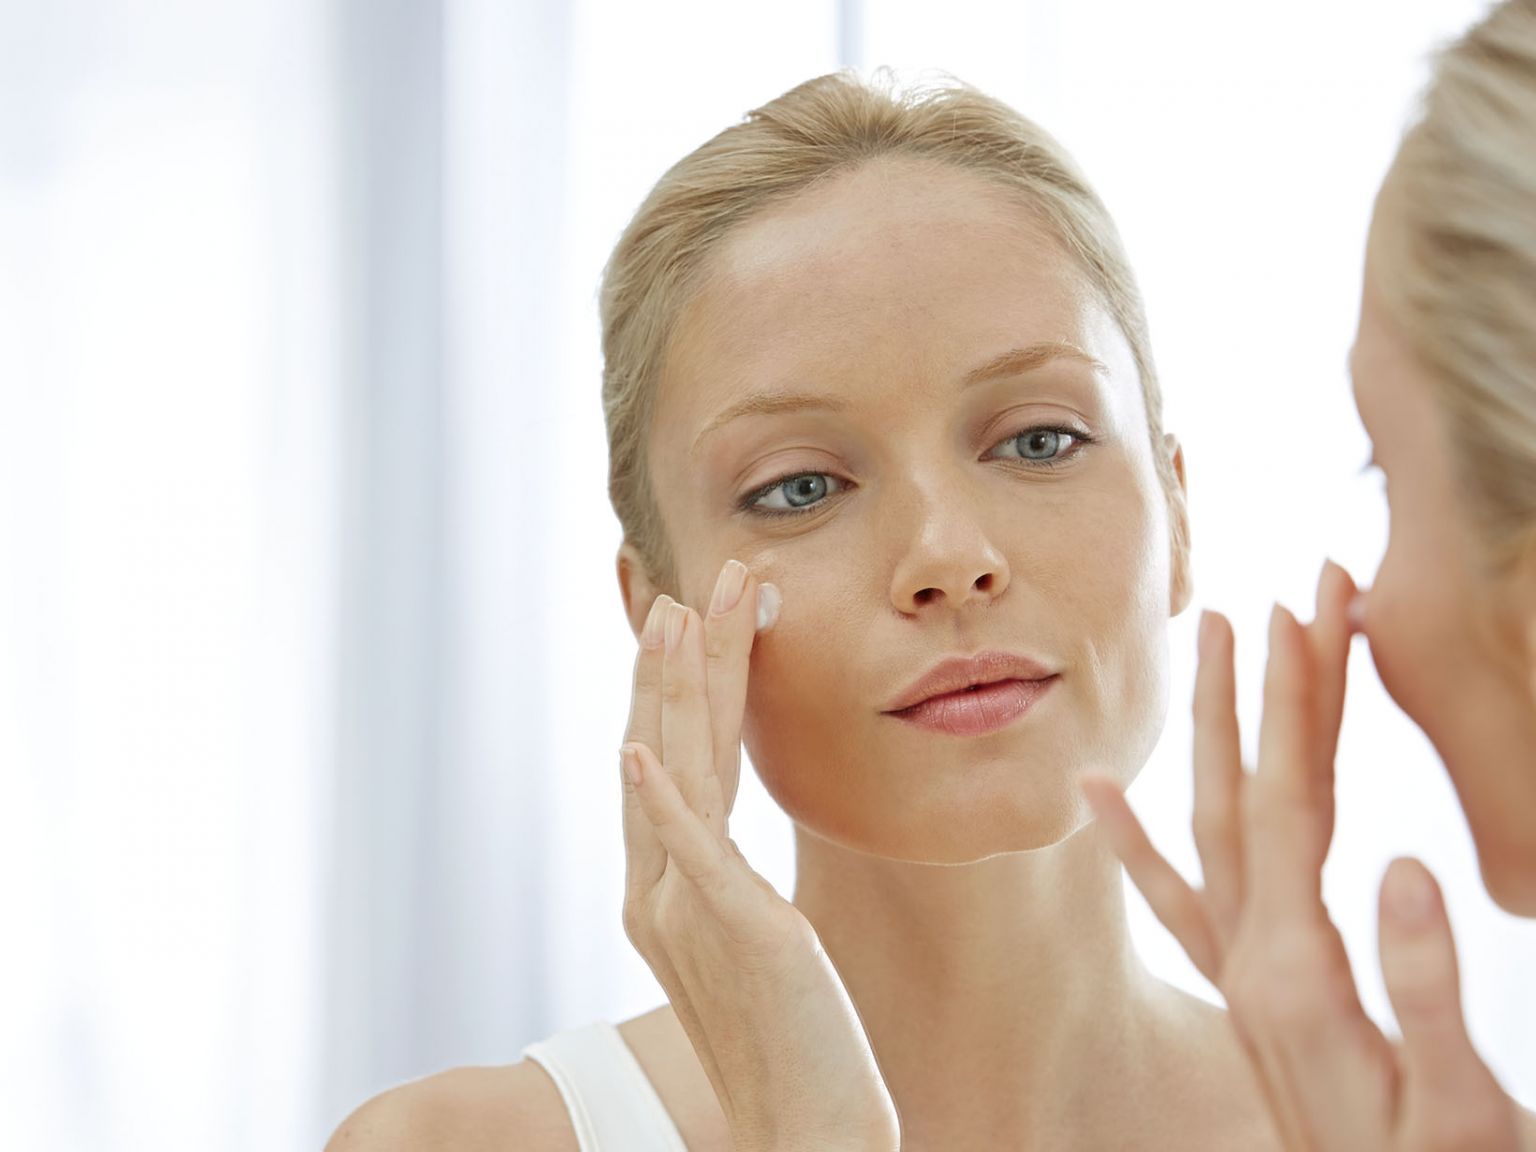 7 habits that cause dry skin #3